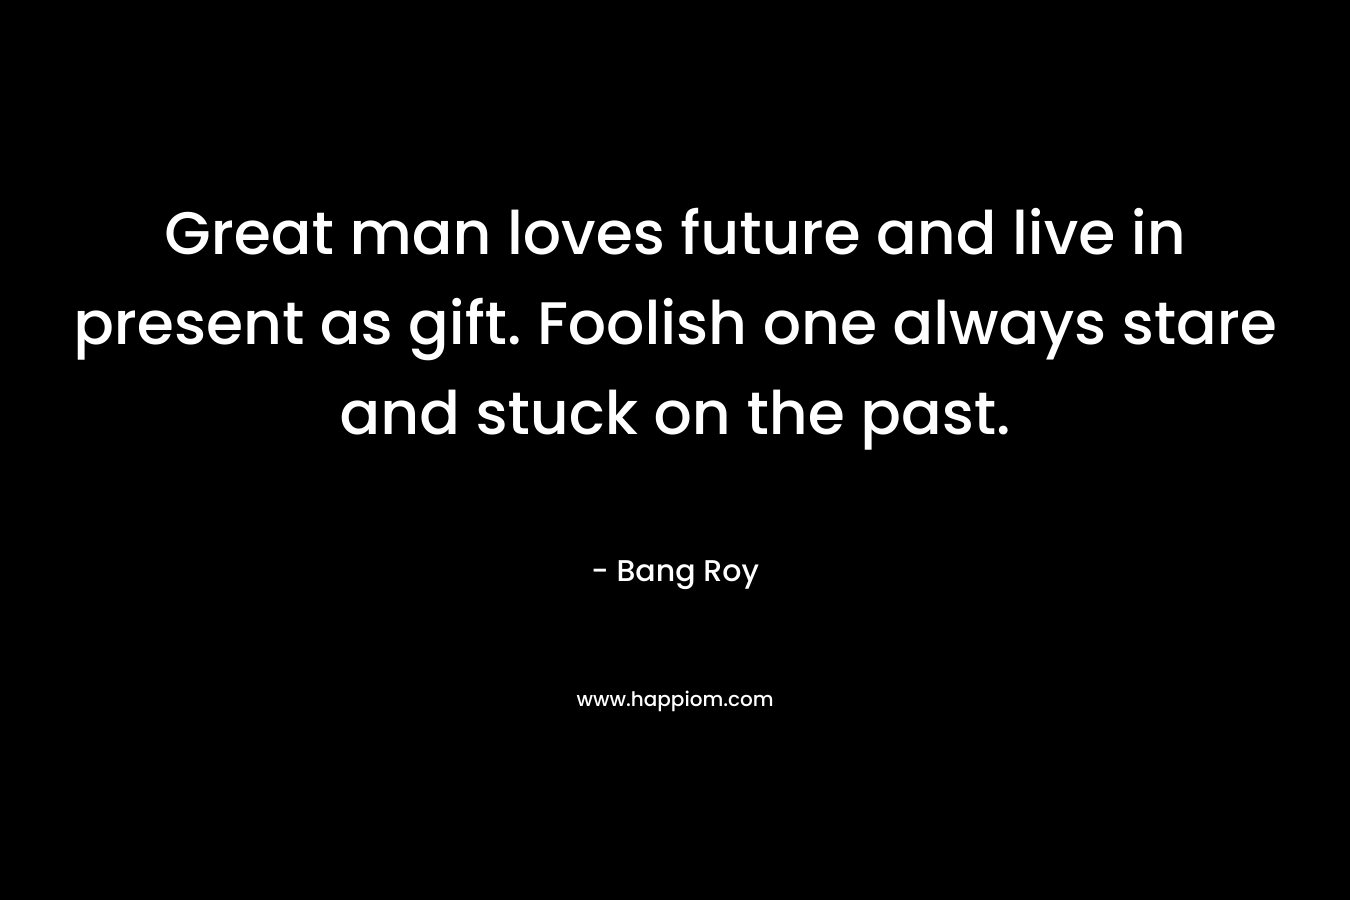 Great man loves future and live in present as gift. Foolish one always stare and stuck on the past. – Bang Roy